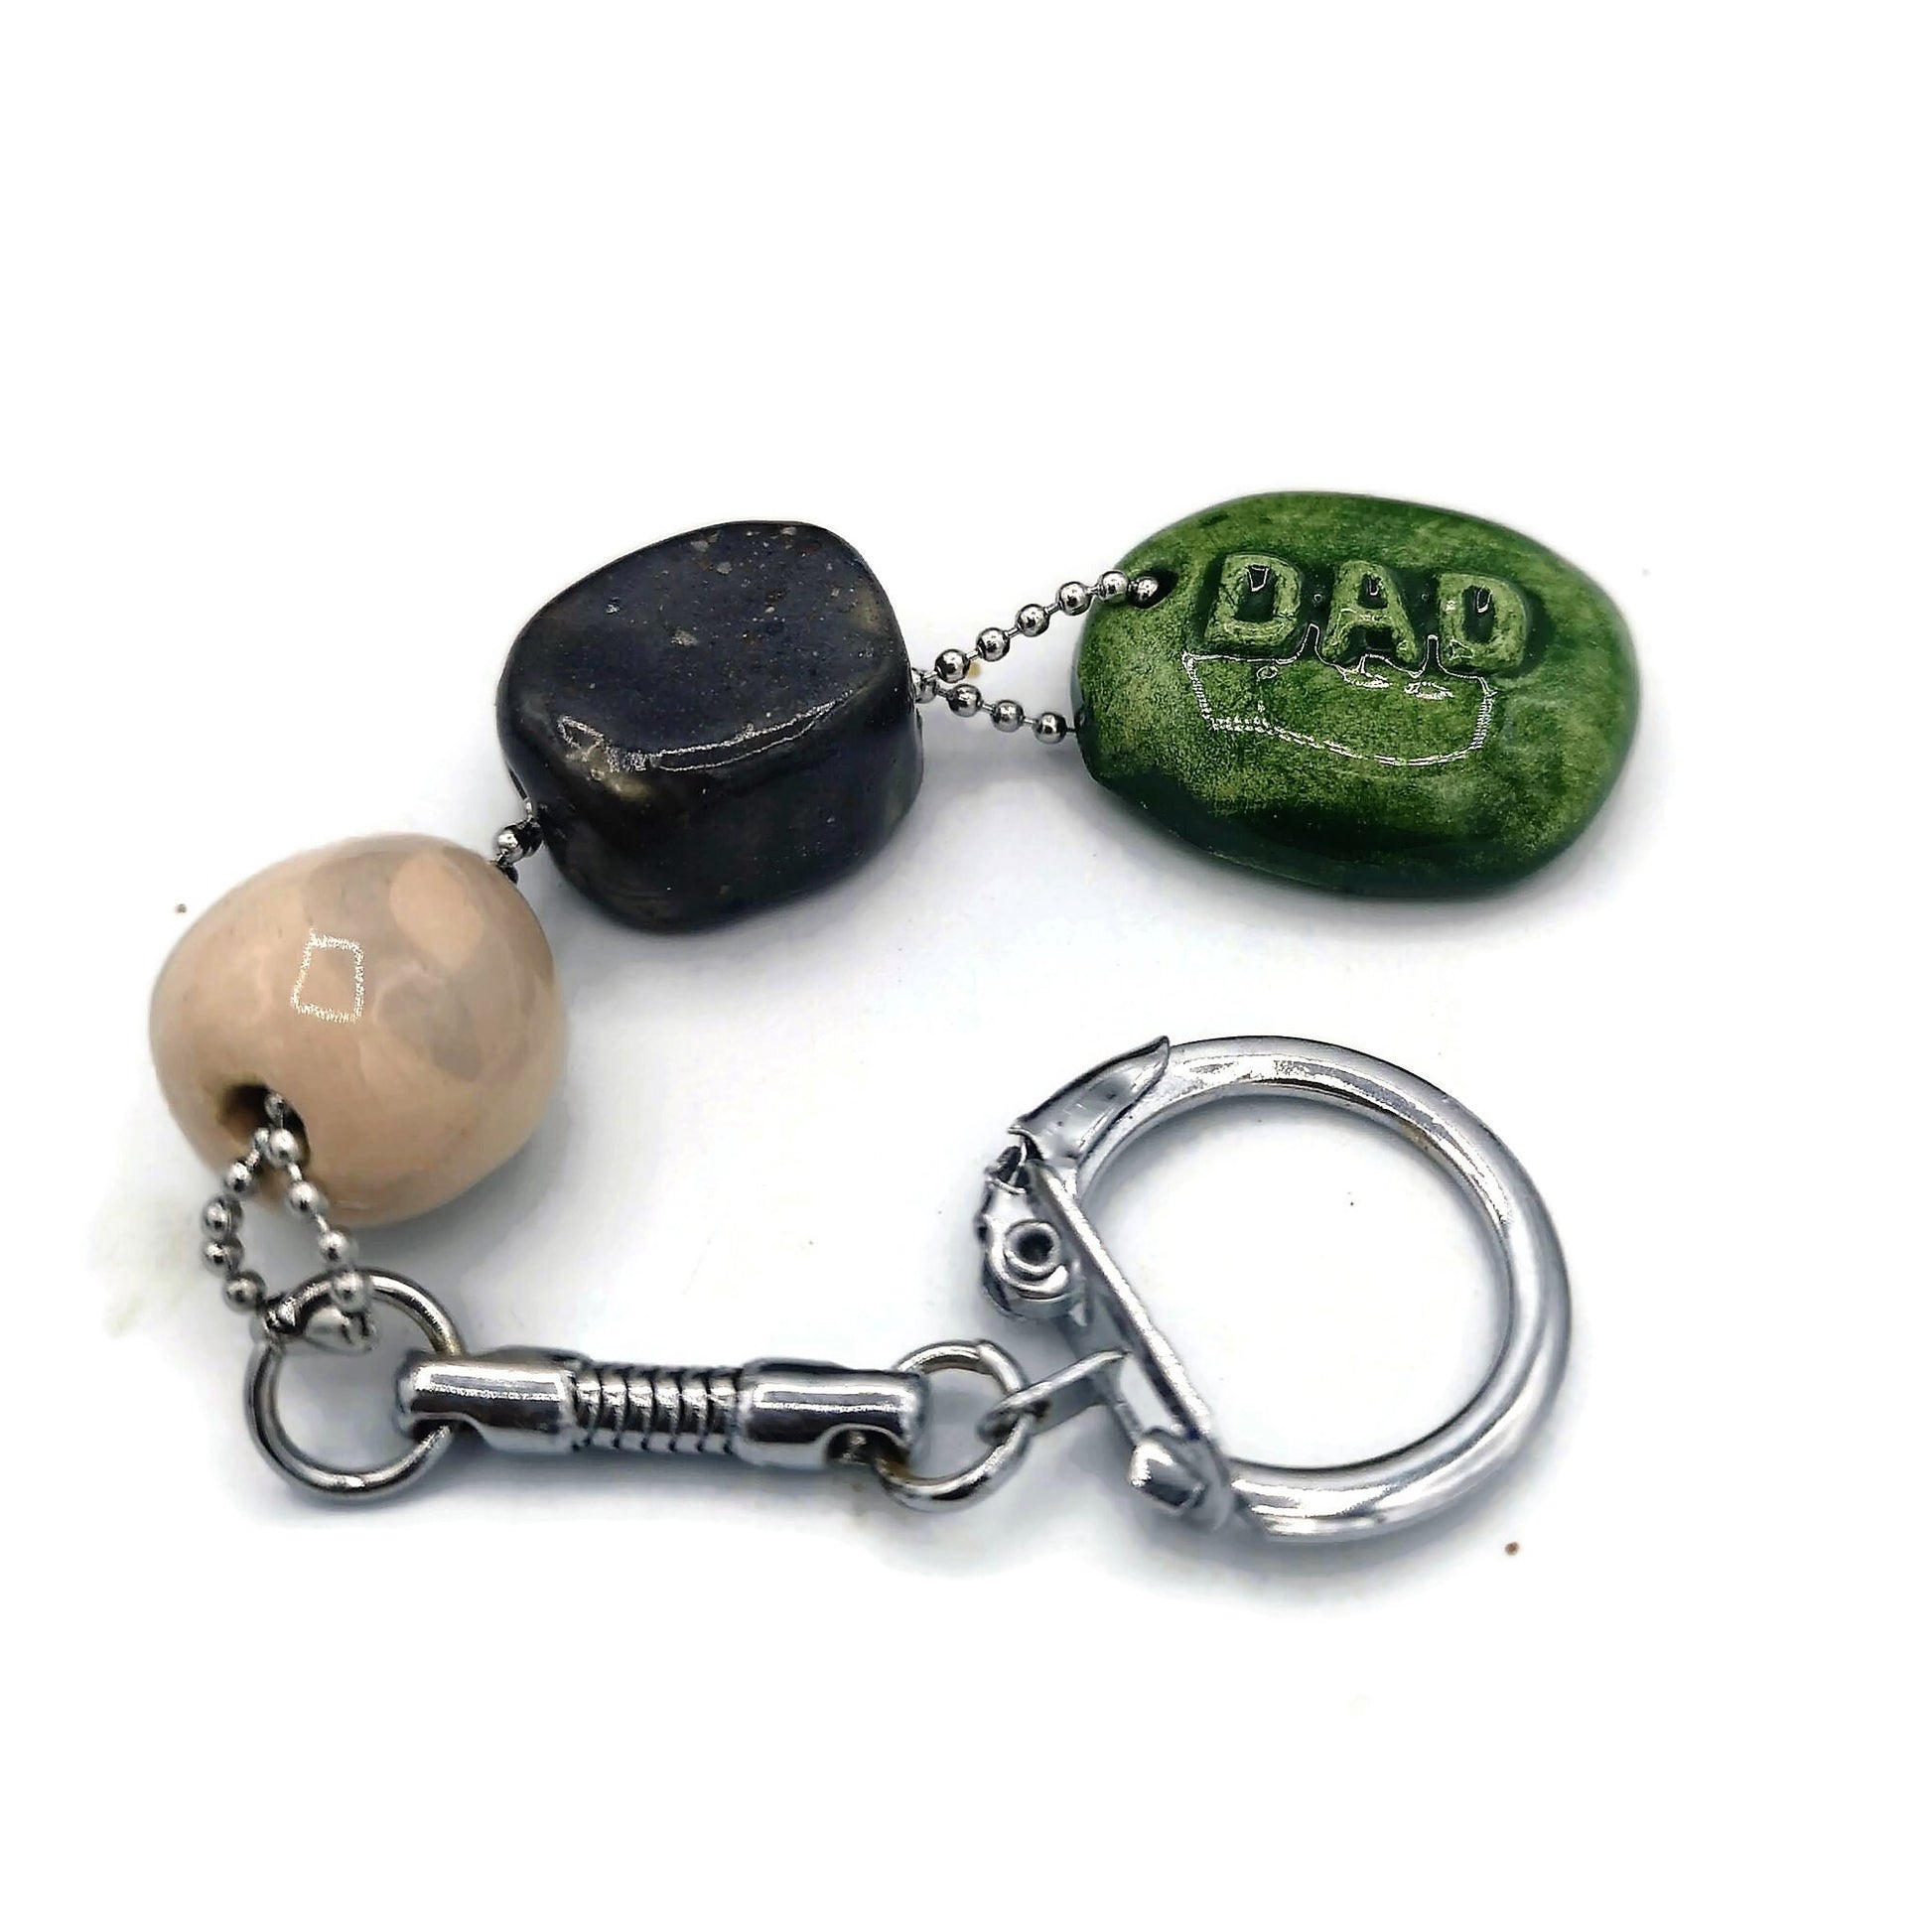 COOL DAD KEYCHAIN, Clay Keychain For Men Customizable, Ceramic Charm Keyring Beaded Accessories Gift For Daddy - Ceramica Ana Rafael